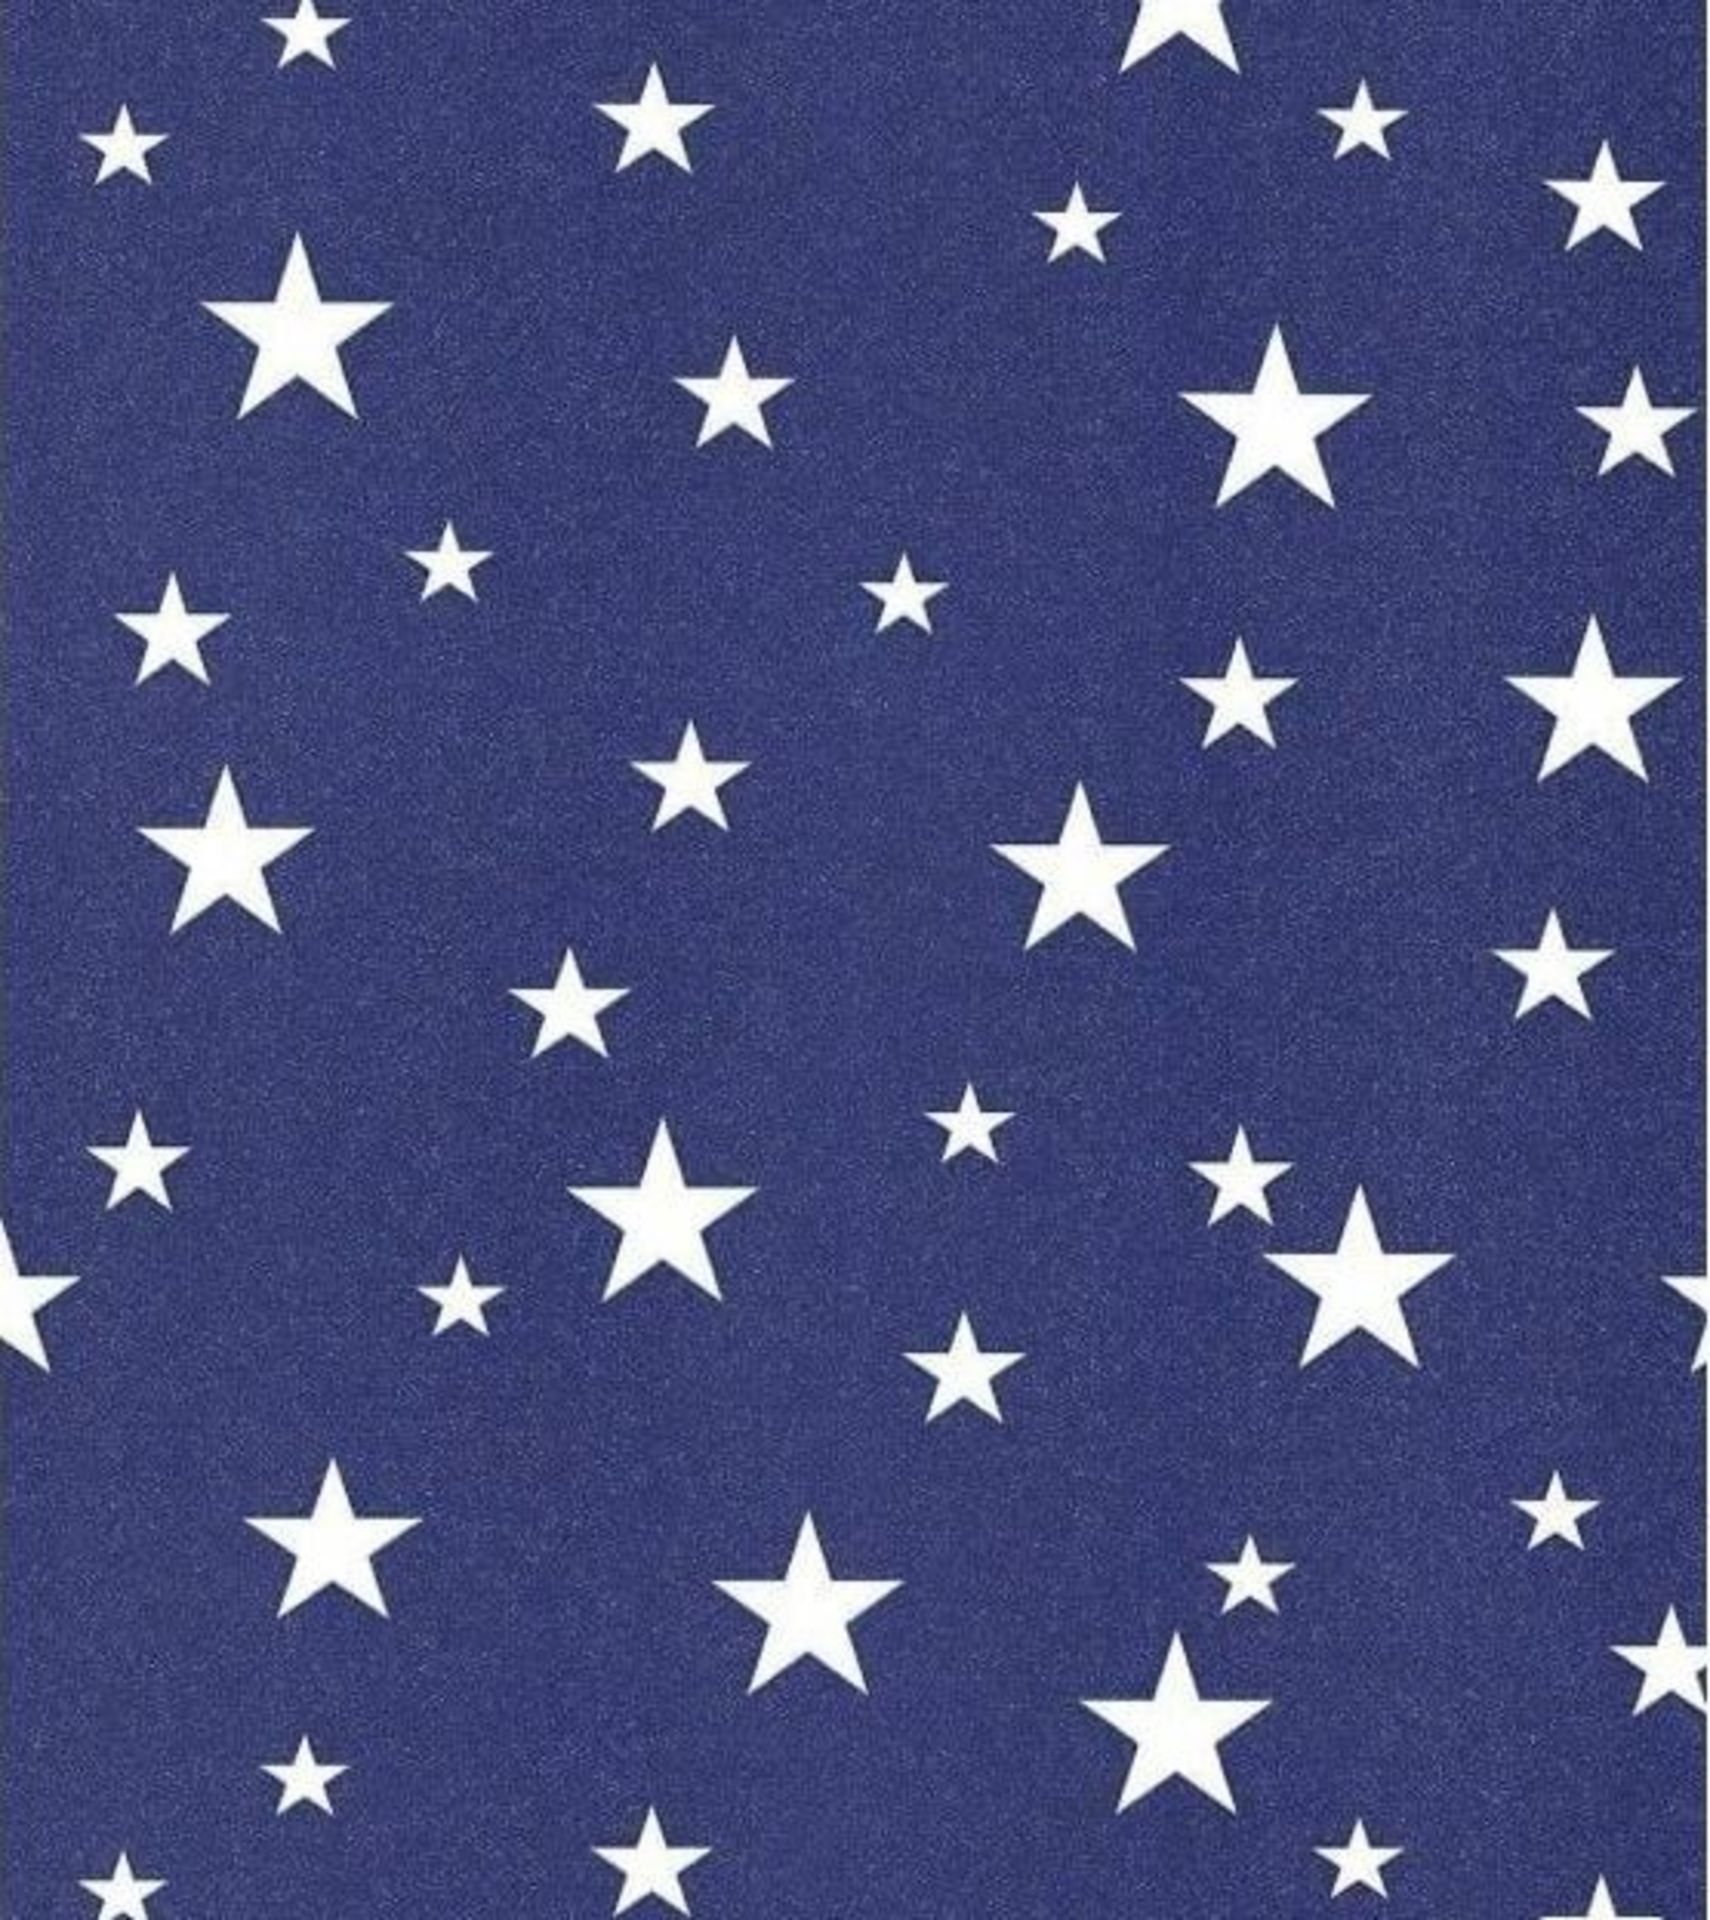 1 LOT TO CONTAIN 6 AS NEW ROLLS OF ARTHOUSE TEXTURED VINYL DIAMOND STARS GLITTER WALLPAPER IN BLUE -